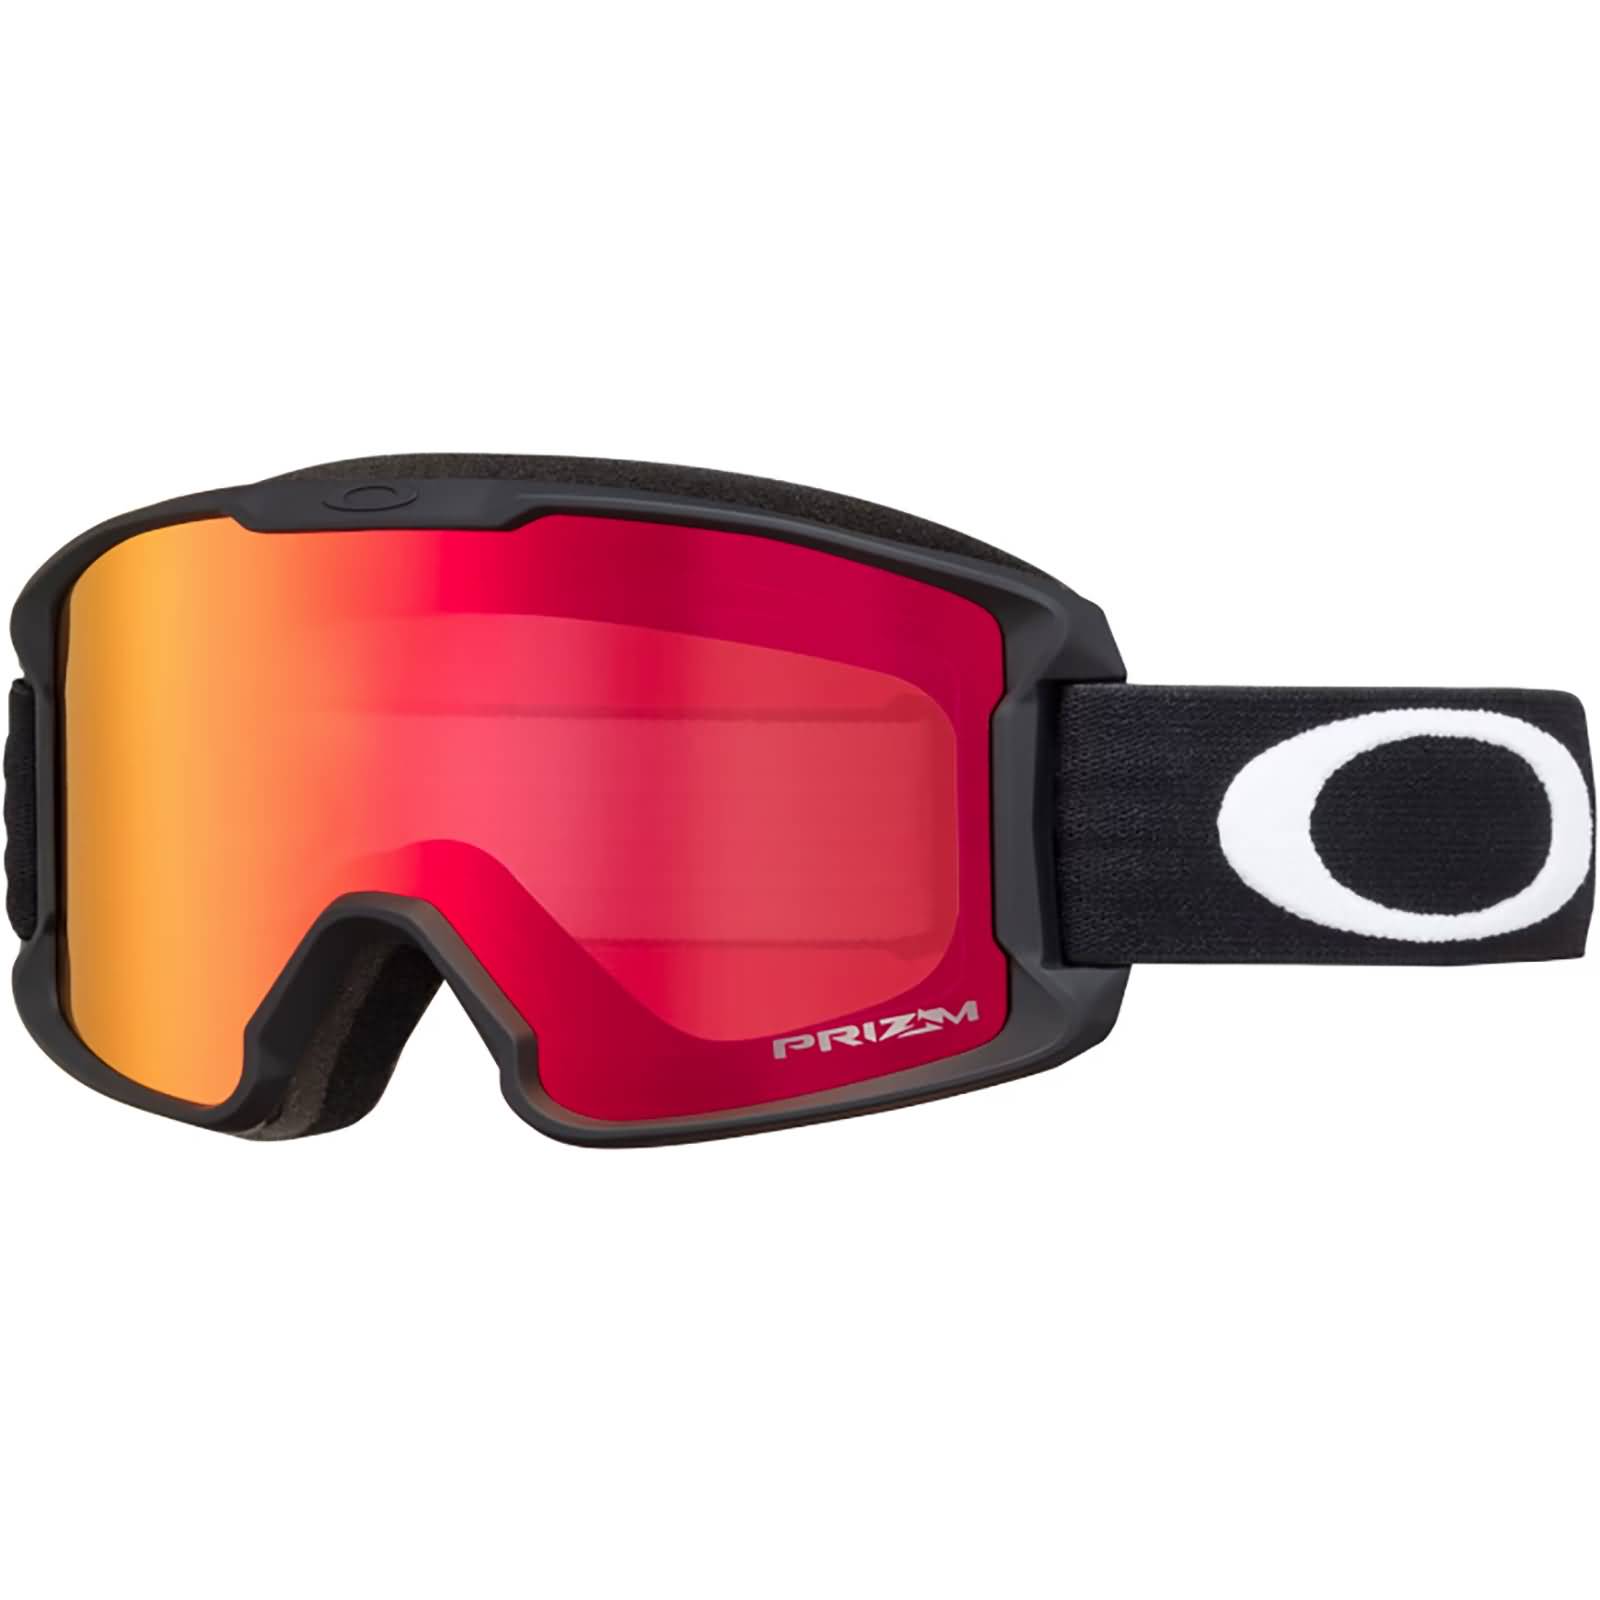 https://originboardshop.com/products/oakley-line-miner-xs-prizm-youth-snow-goggles-brand-new-oo7095-03-hc1